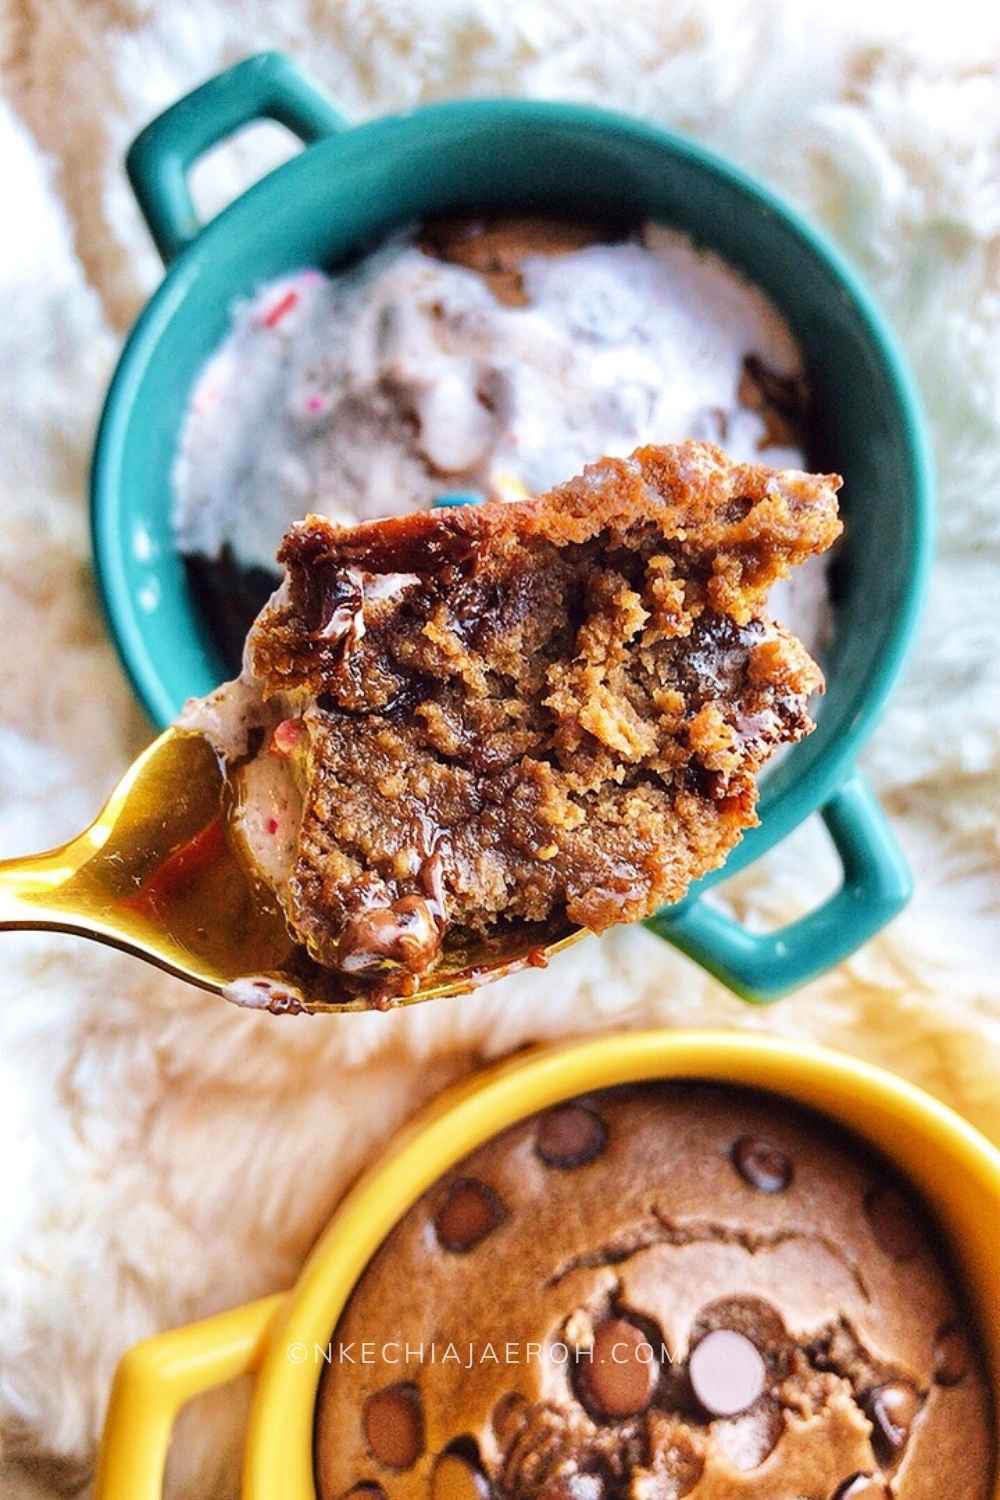 A delightful TikTok inspired chocolate baked oats recipe is the healthy brownie in a mug you need to start your day! This TikTok Viral Chocolate Baked Oats Recipe is a definition of cake for breakfast. Customize this recipe to suit your taste, add the flavors you want!  Making baked oatmeal is easy and requires only two steps - blend, bake, and enjoy! This recipe makes for a wholesome breakfast, or dessert everyone member of your family will love. Top this with a little yogurt, icing, more melted chocolate, or any nut/seed spread of choice to get the best out of it! #bakedoats #TikTokhack #bakedoatmeal #oatmeal #healthybreakfast #oatcake #tikTokrecipe